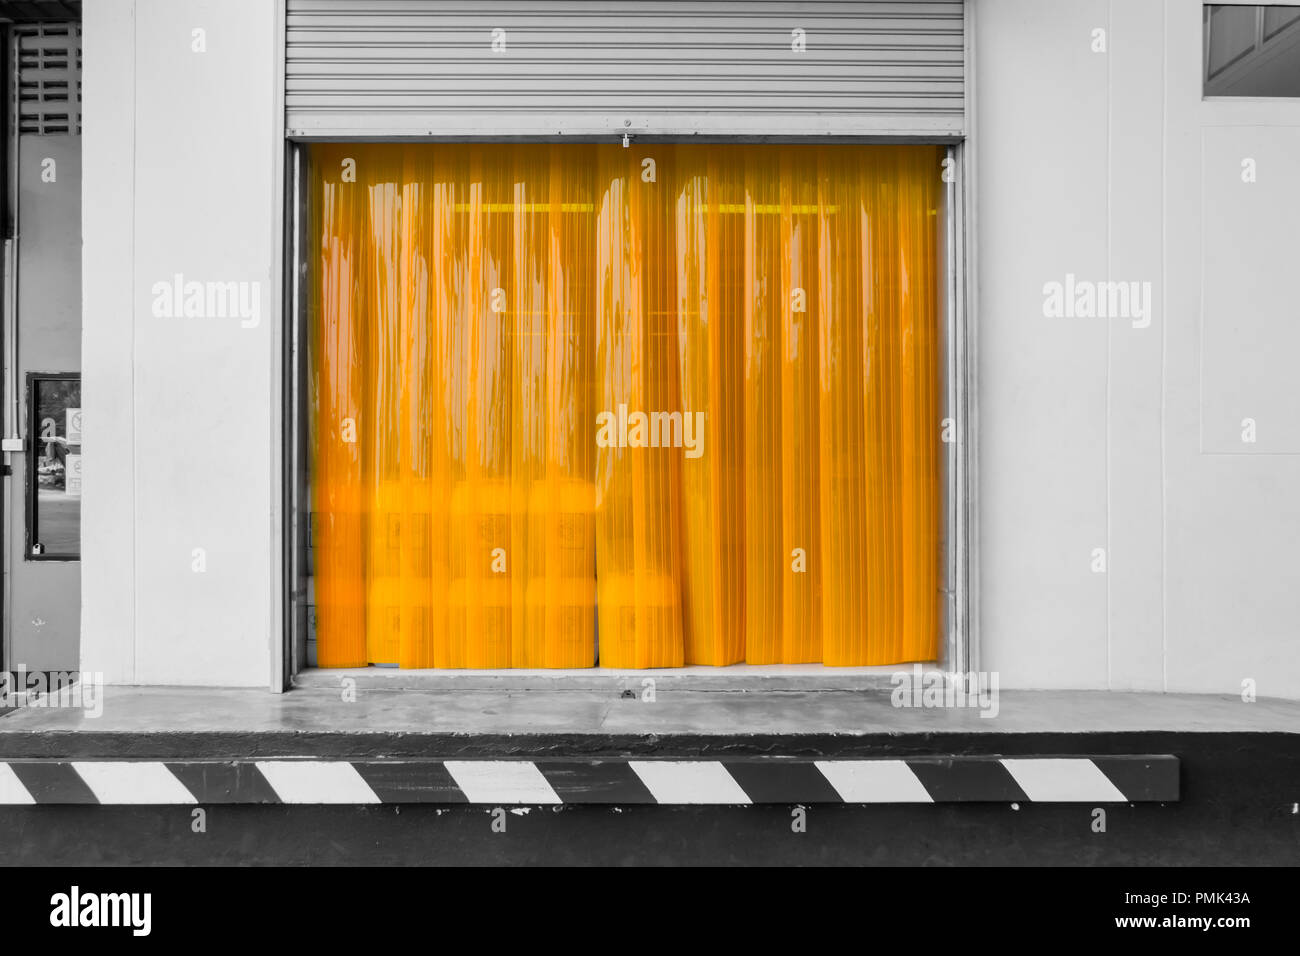 Warehouse gate loading area with PVC strip curtain or plastic strip doors. Stock Photo